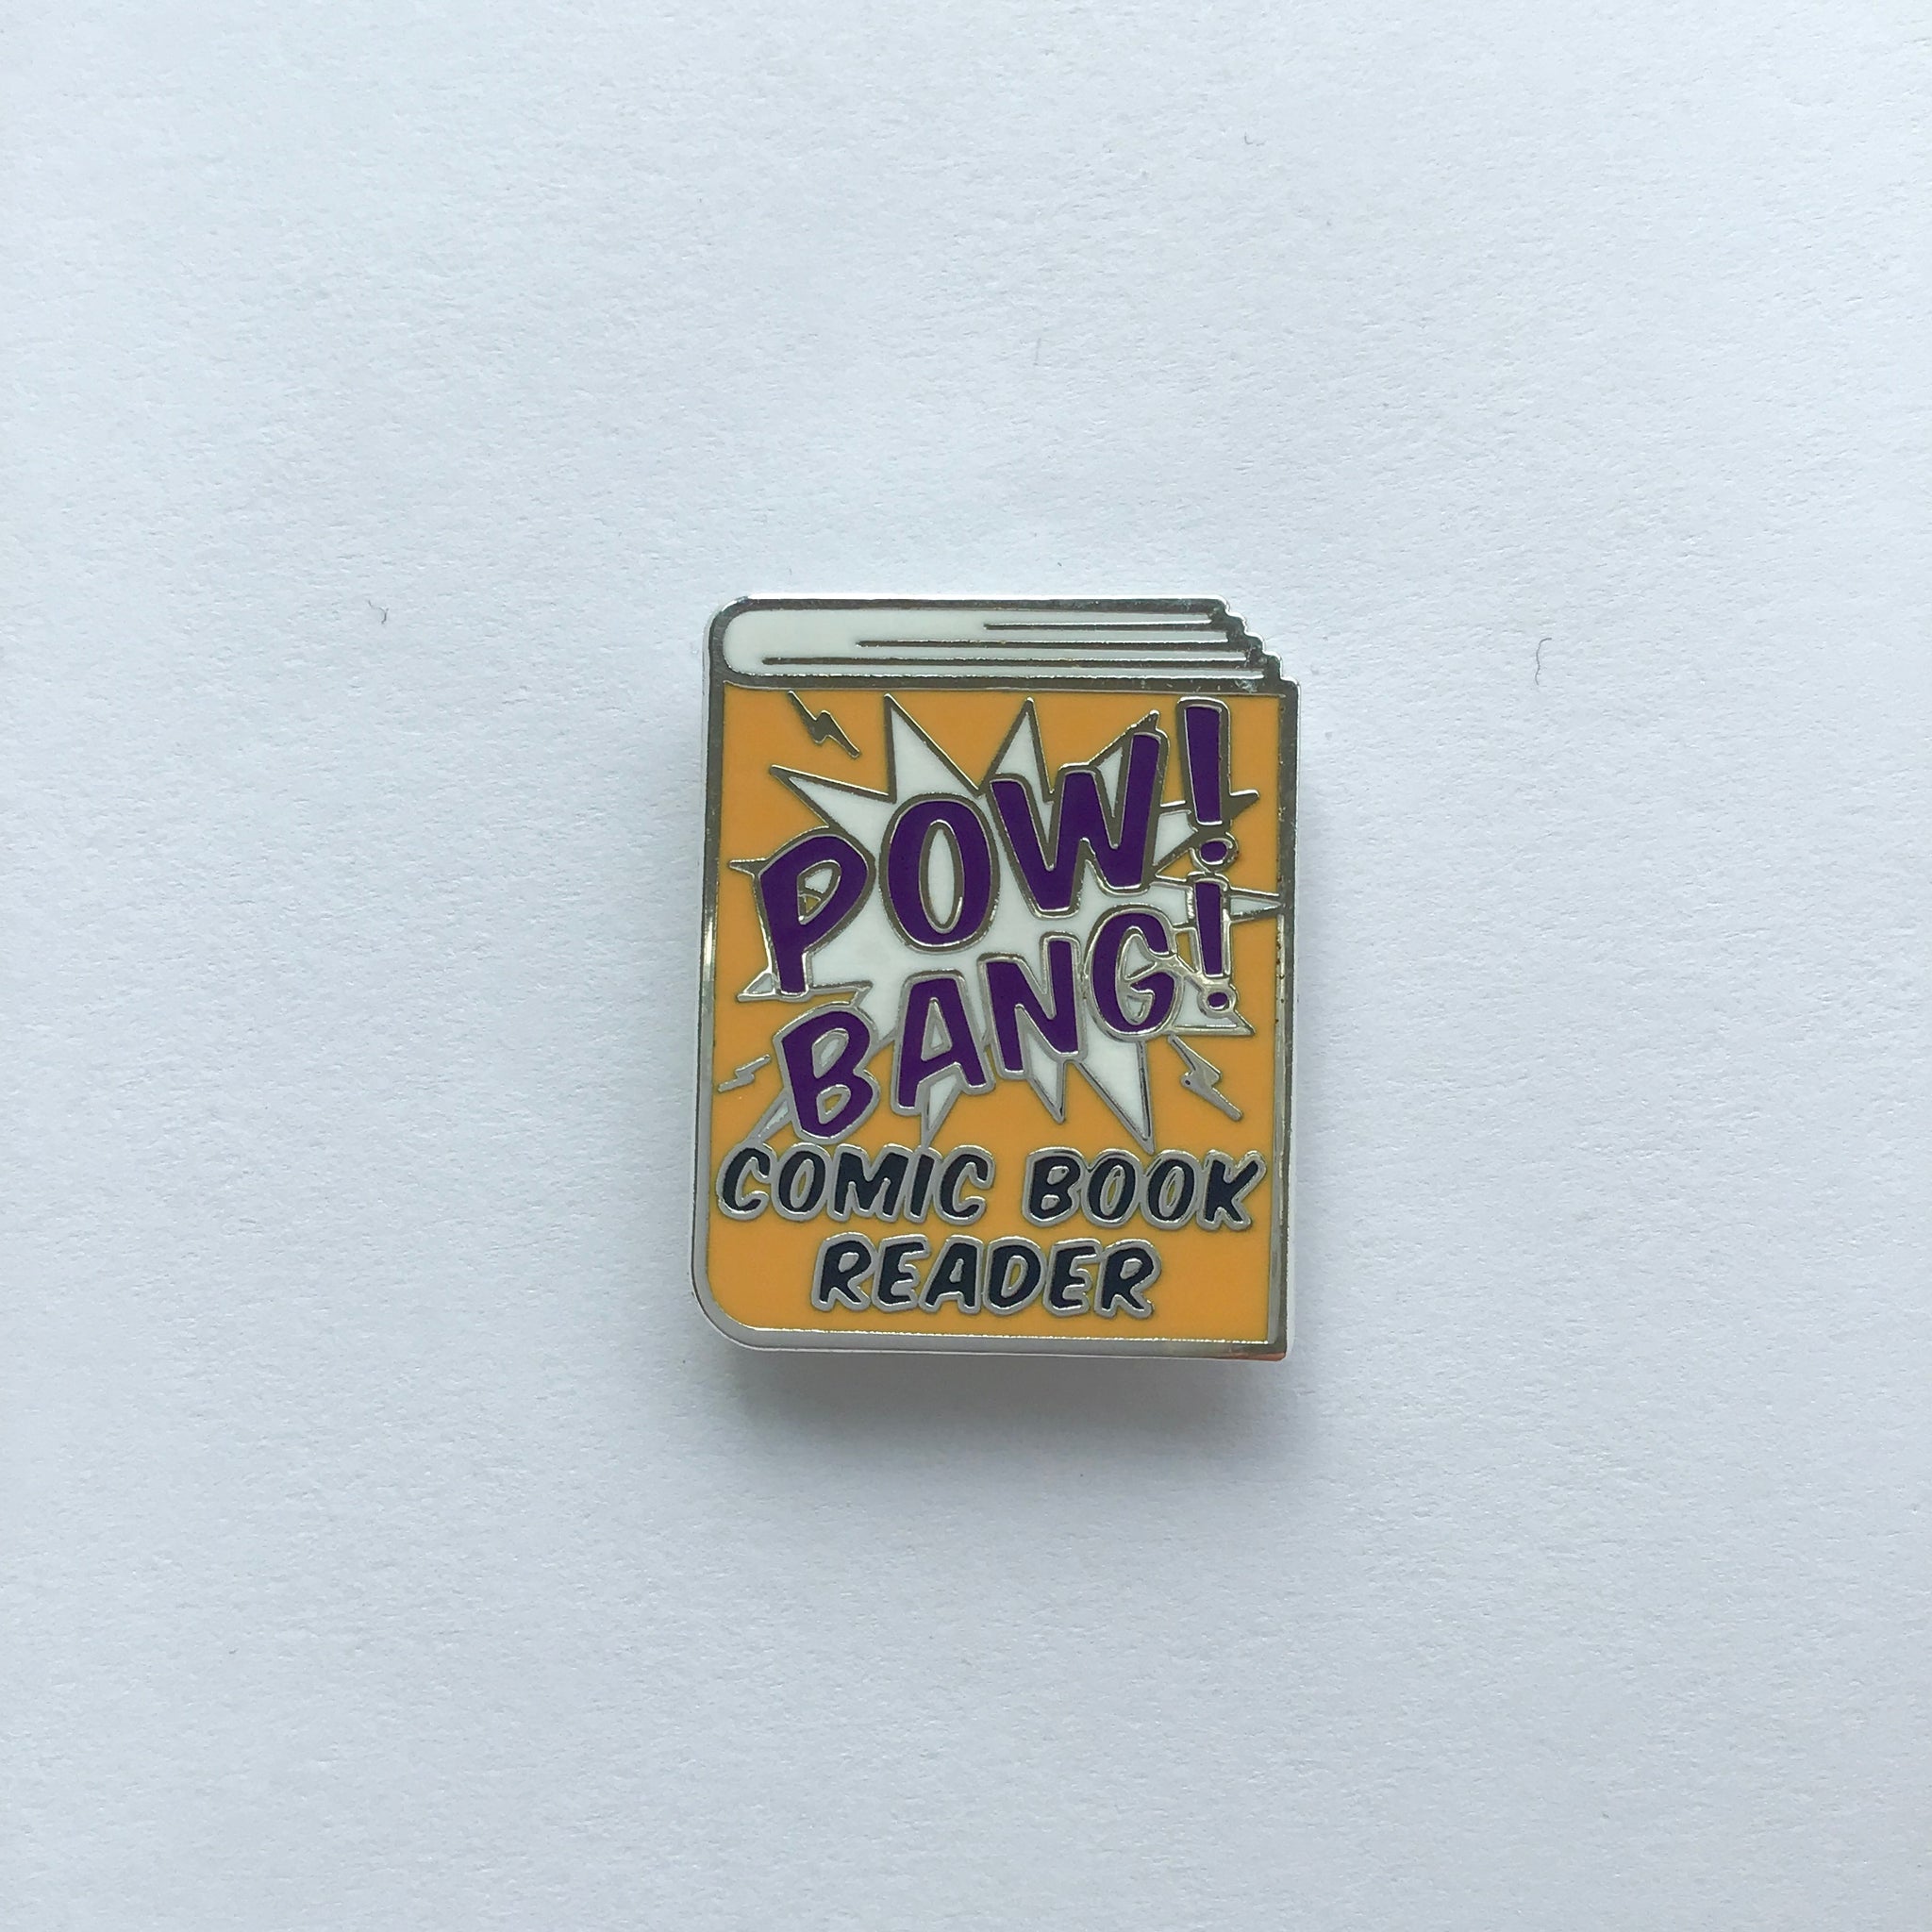 Pin on Comic Book-related